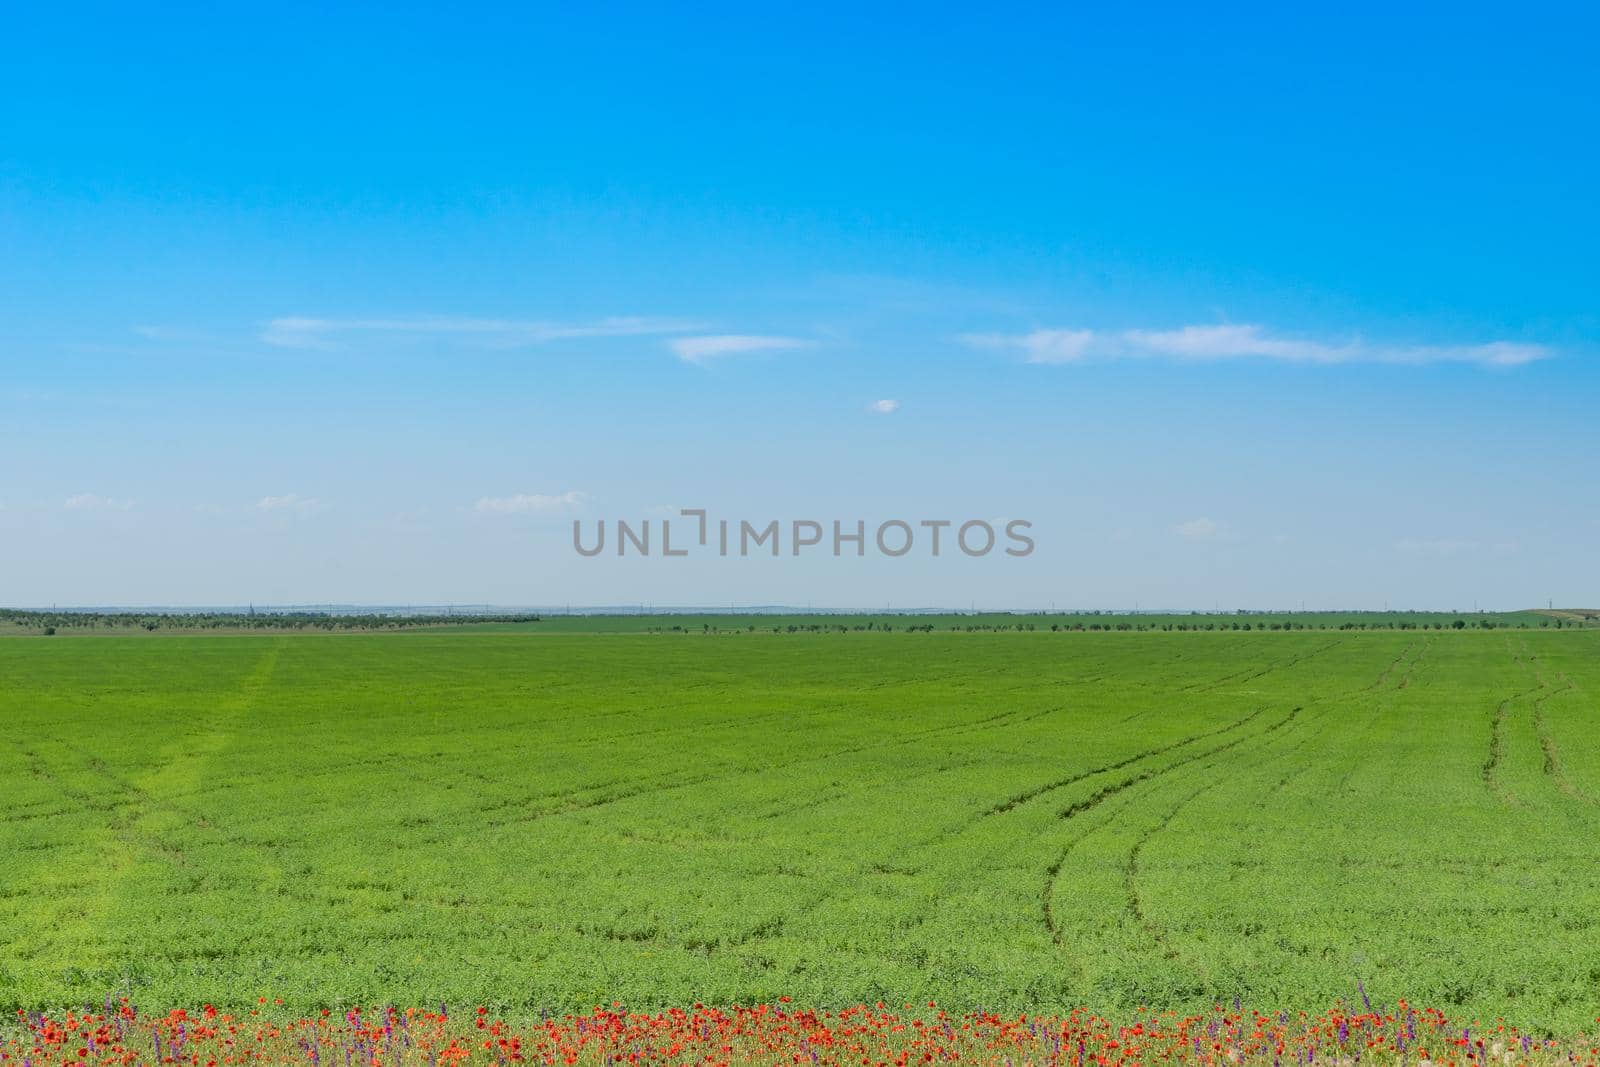 Natural landscape with green field, red poppies on the edge and blue sky with white clouds.